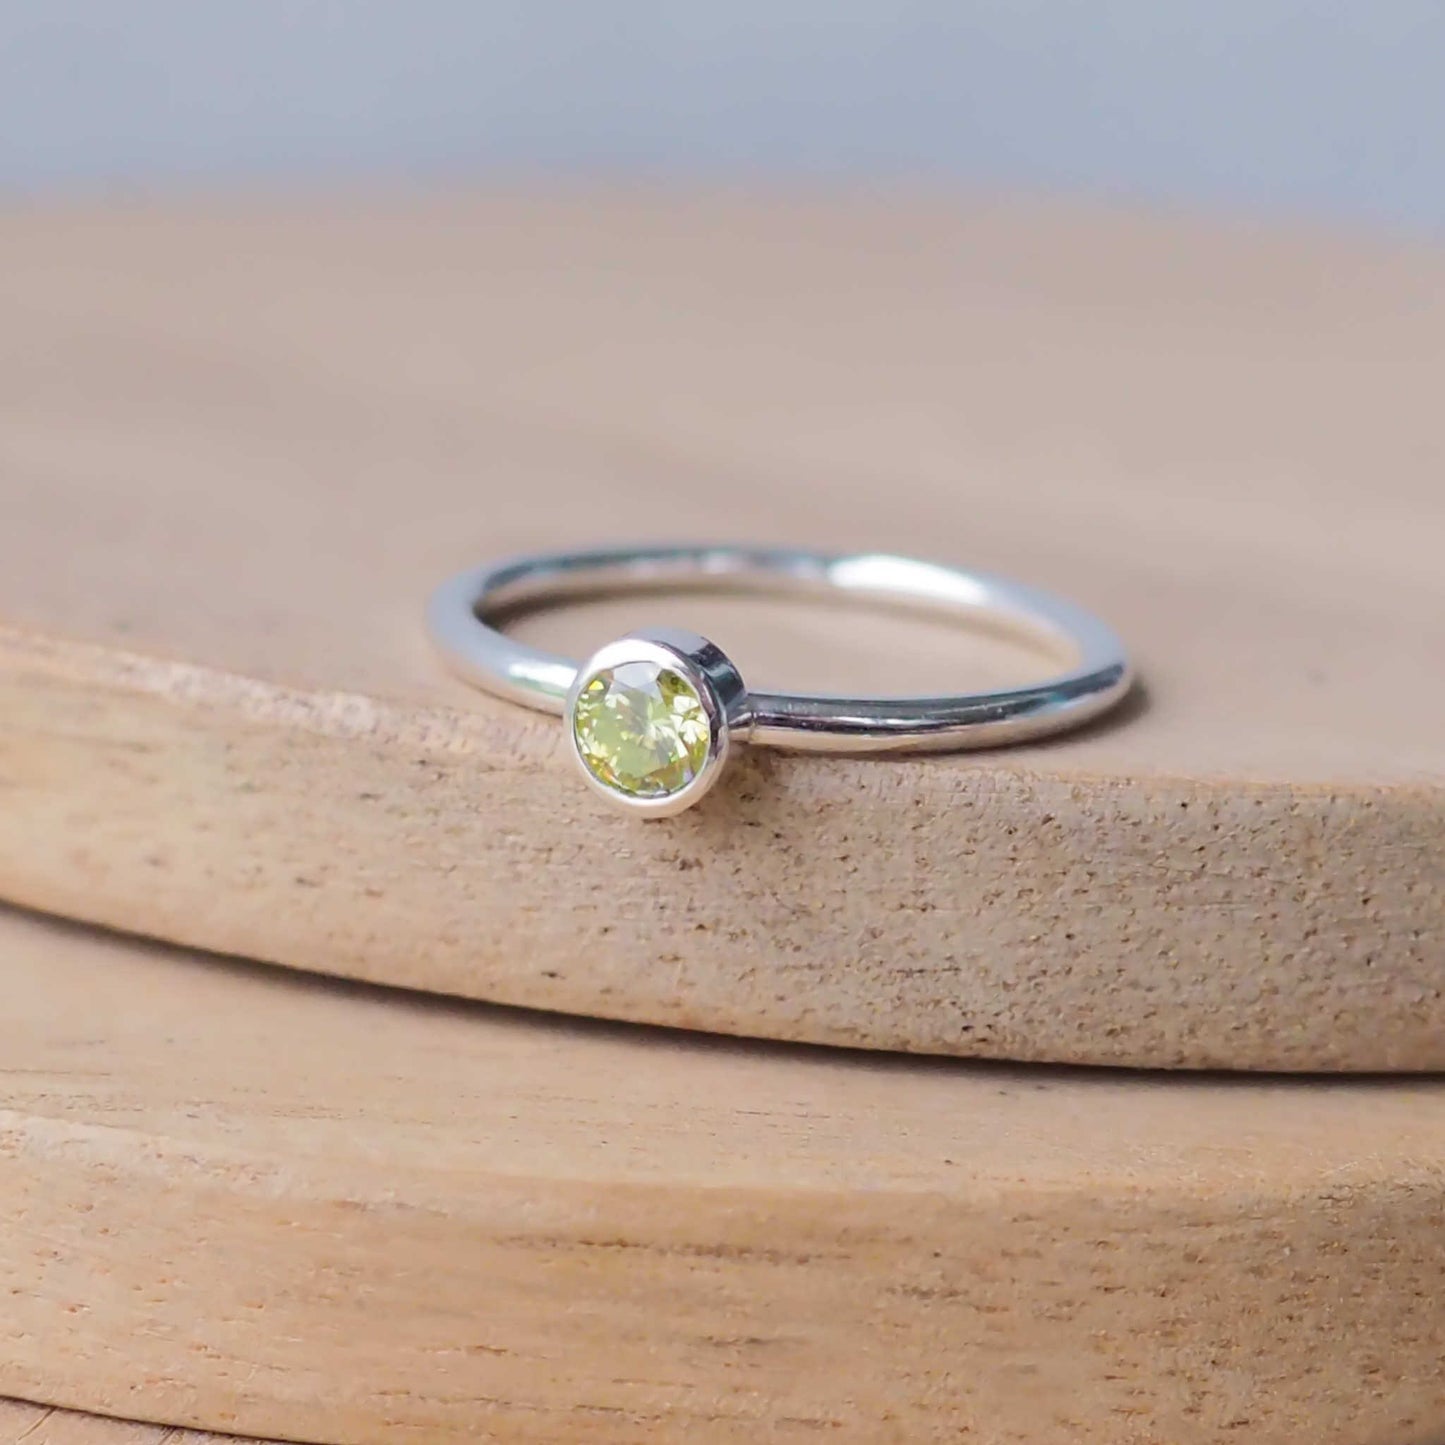 Silver ring with a Mossy light Green Peridot gemstone. The ring is simple in style with no embellishment , with a round wire band 1.5mm thick with a simple Peridot 4mm round cubic zirconia stone set in an enclosed silver setting. Peridot is birthstone for August. The ring is Sterling Silver and made to your ring size. Handmade in Scotland by Maram Jewellery